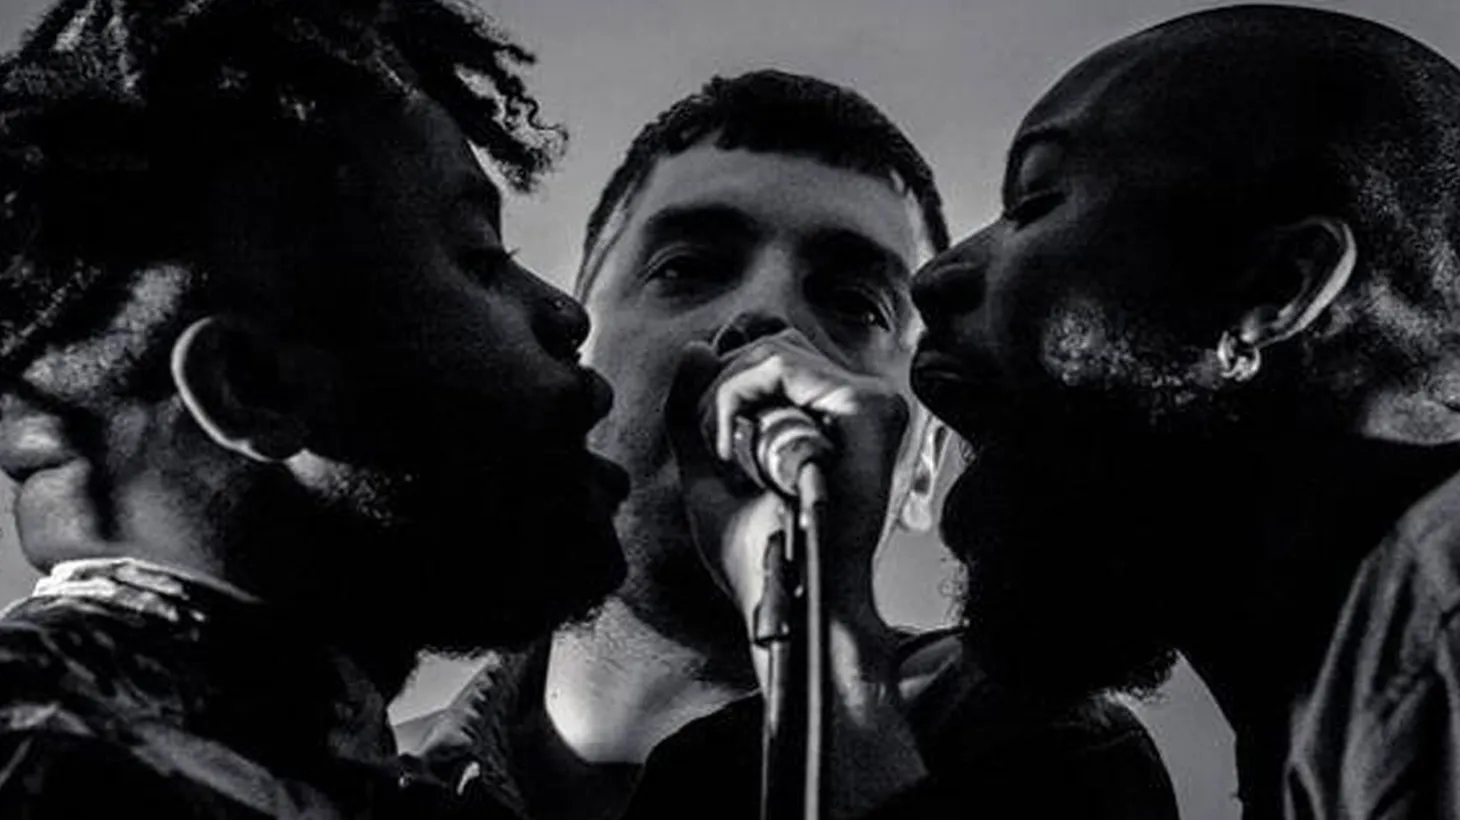 Scottish hip hop outfit Young Fathers received one of the UK's highest honors for music – the Mercury Prize – for their debut release.